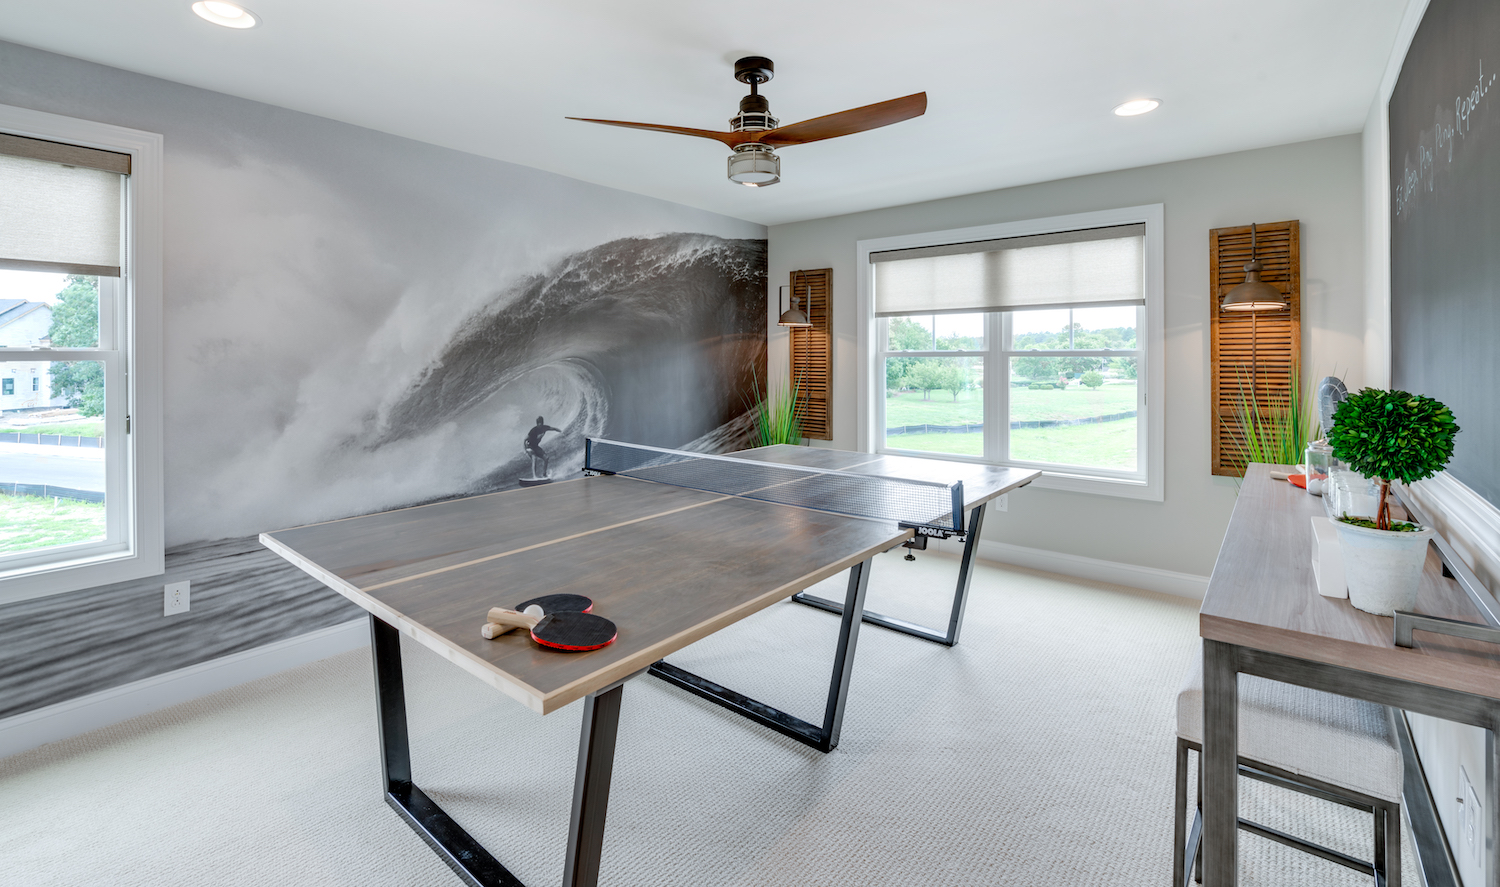 Black and white mural of a surfer on a huge wave in a game room